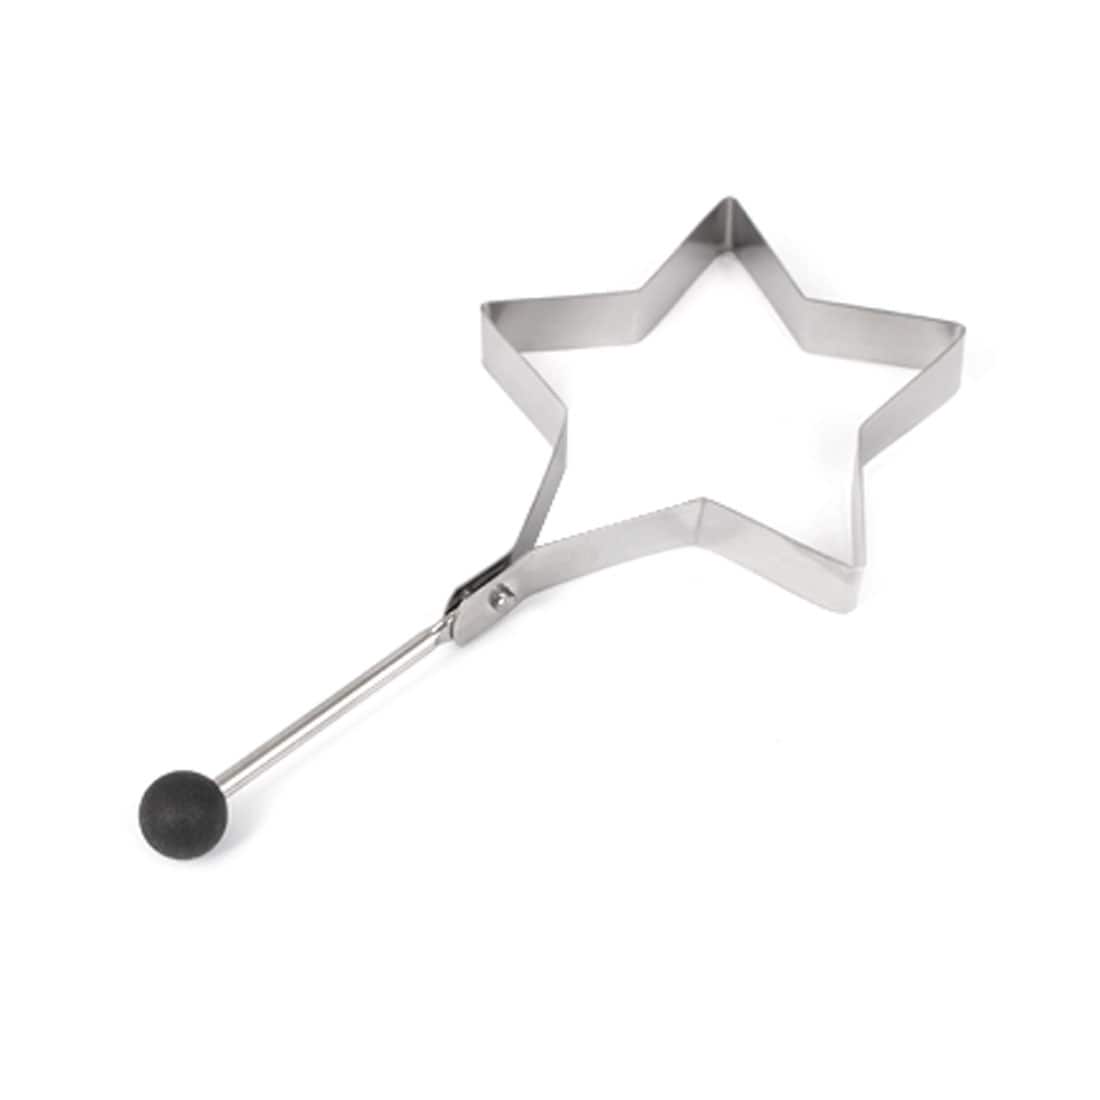 https://ak1.ostkcdn.com/images/products/is/images/direct/ab3c58fe3b7cc6615c19db4dc890b020ee17c039/Stainless-Steel-Star-Shaped-Non-stick-Frying-Egg-Mold-Ring-Pancake-Mould.jpg